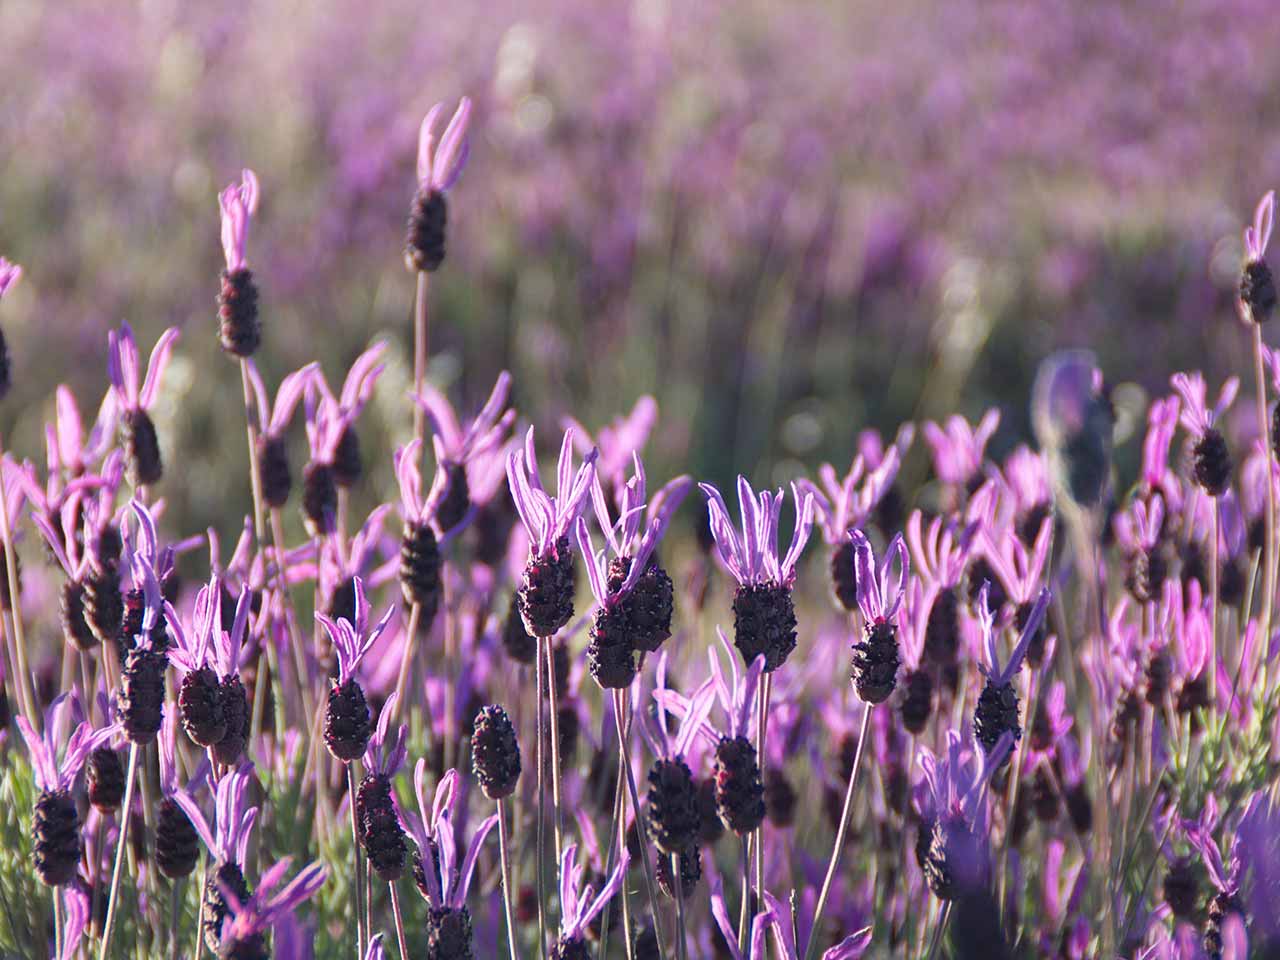 Lavandula stoechas known as French or Spanish lavender